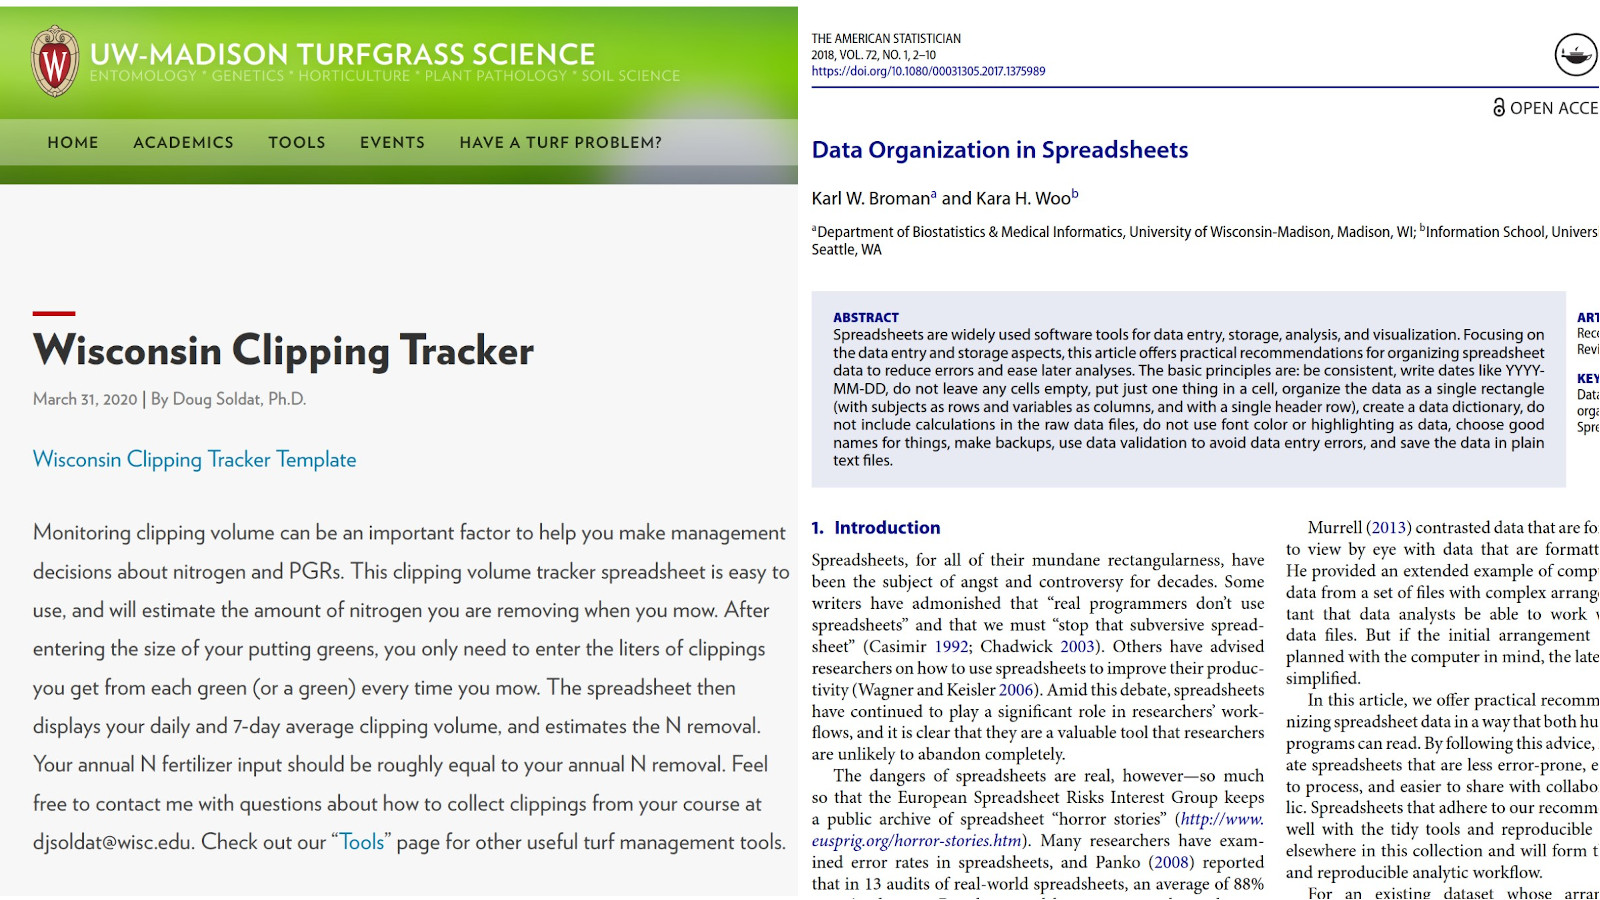 shows 2 images the blog post of Wisconsin clipping tracker template and the Broman and Woo superb article on data in spreadsheets